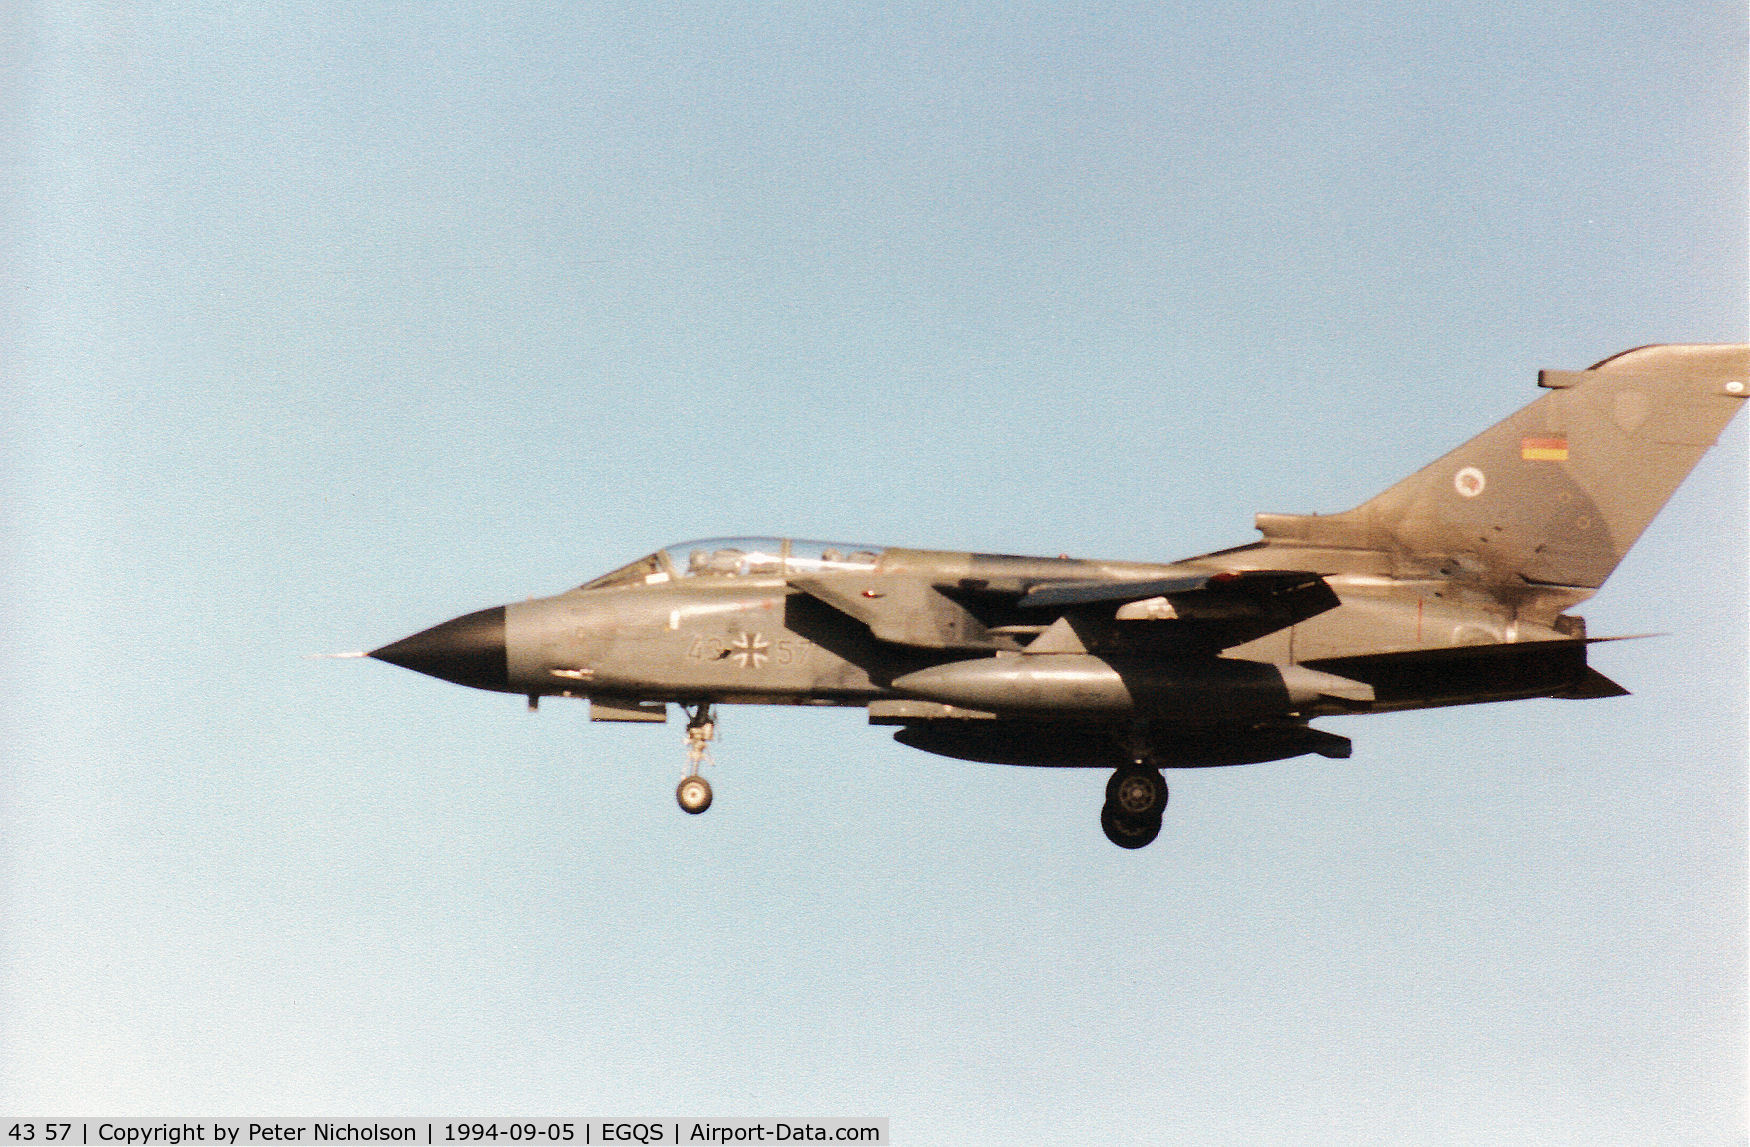 43 57, Panavia Tornado IDS C/N 151/GS030/4057, Tornado IDS, callsign German Air Force 5189, of AKG-51 on final approach to Runway 23 at RAF Lossiemouth in September 1994.